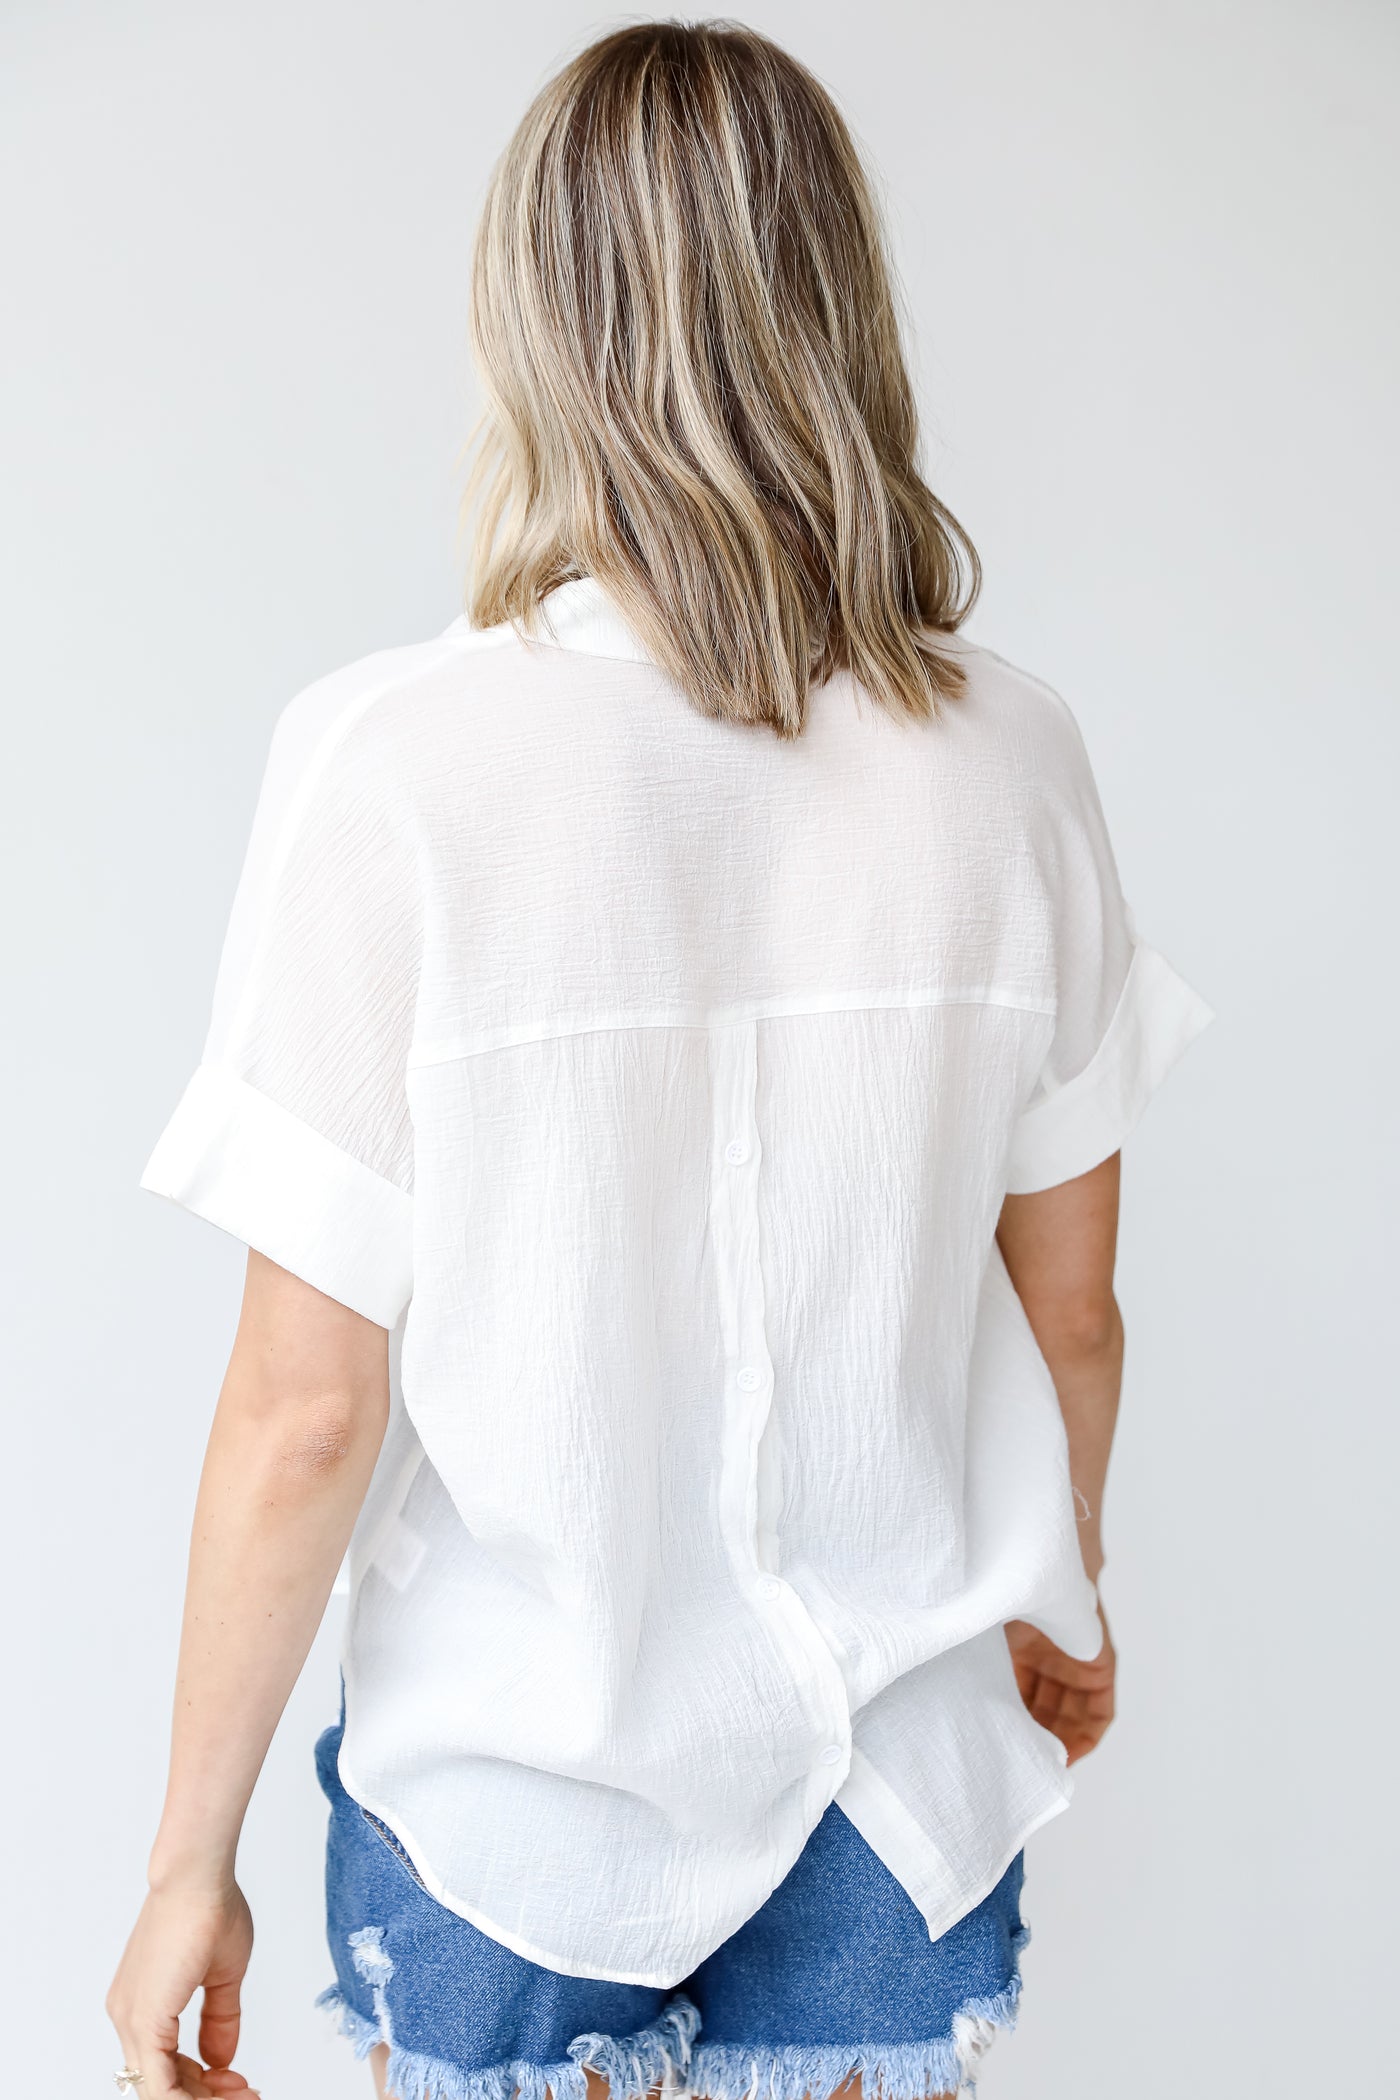 Linen Blouse in white back view